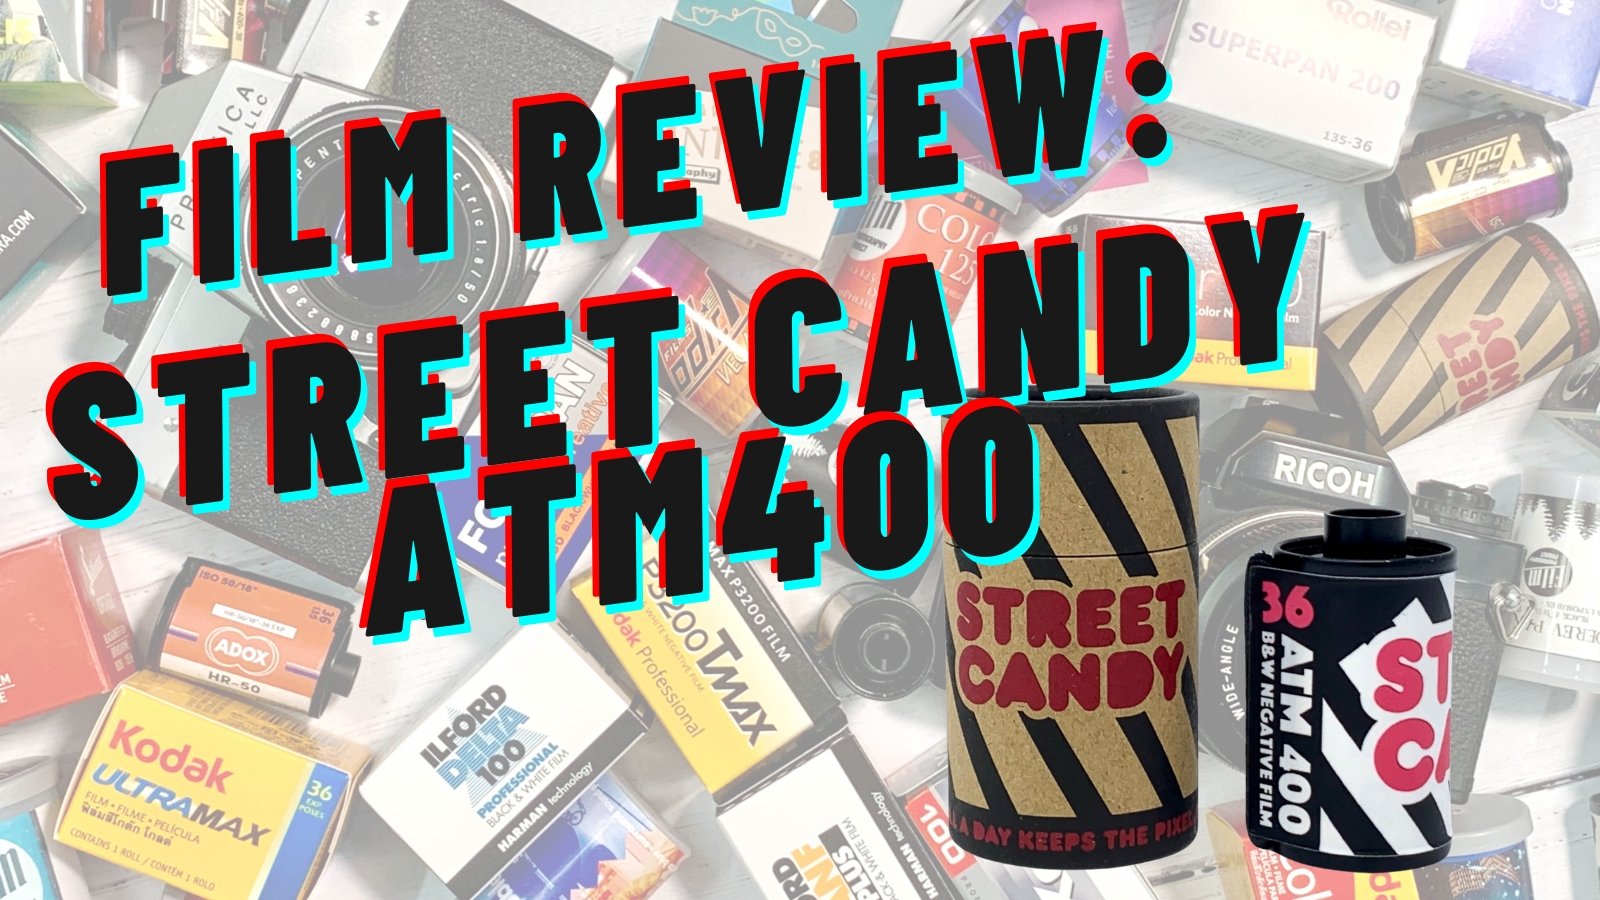 Street Candy ATM400 Review - Analogue Wonderland